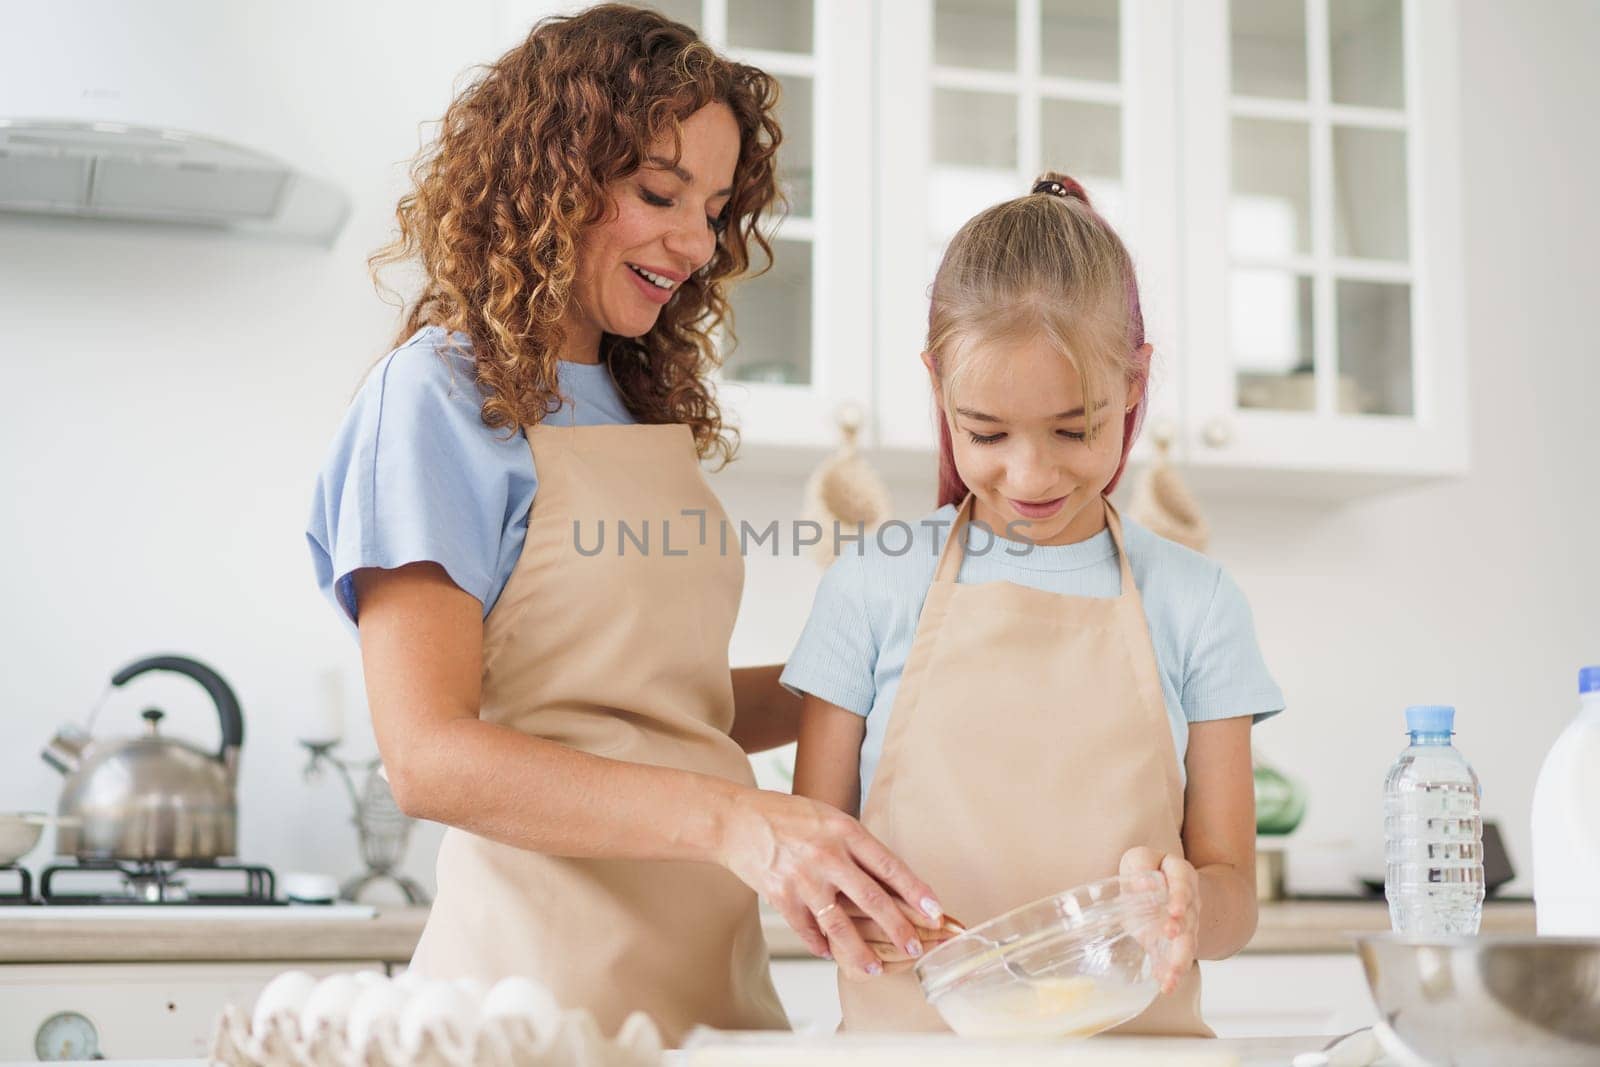 Mother and teen daughter making dough for pastry toghether in kitchen, close up